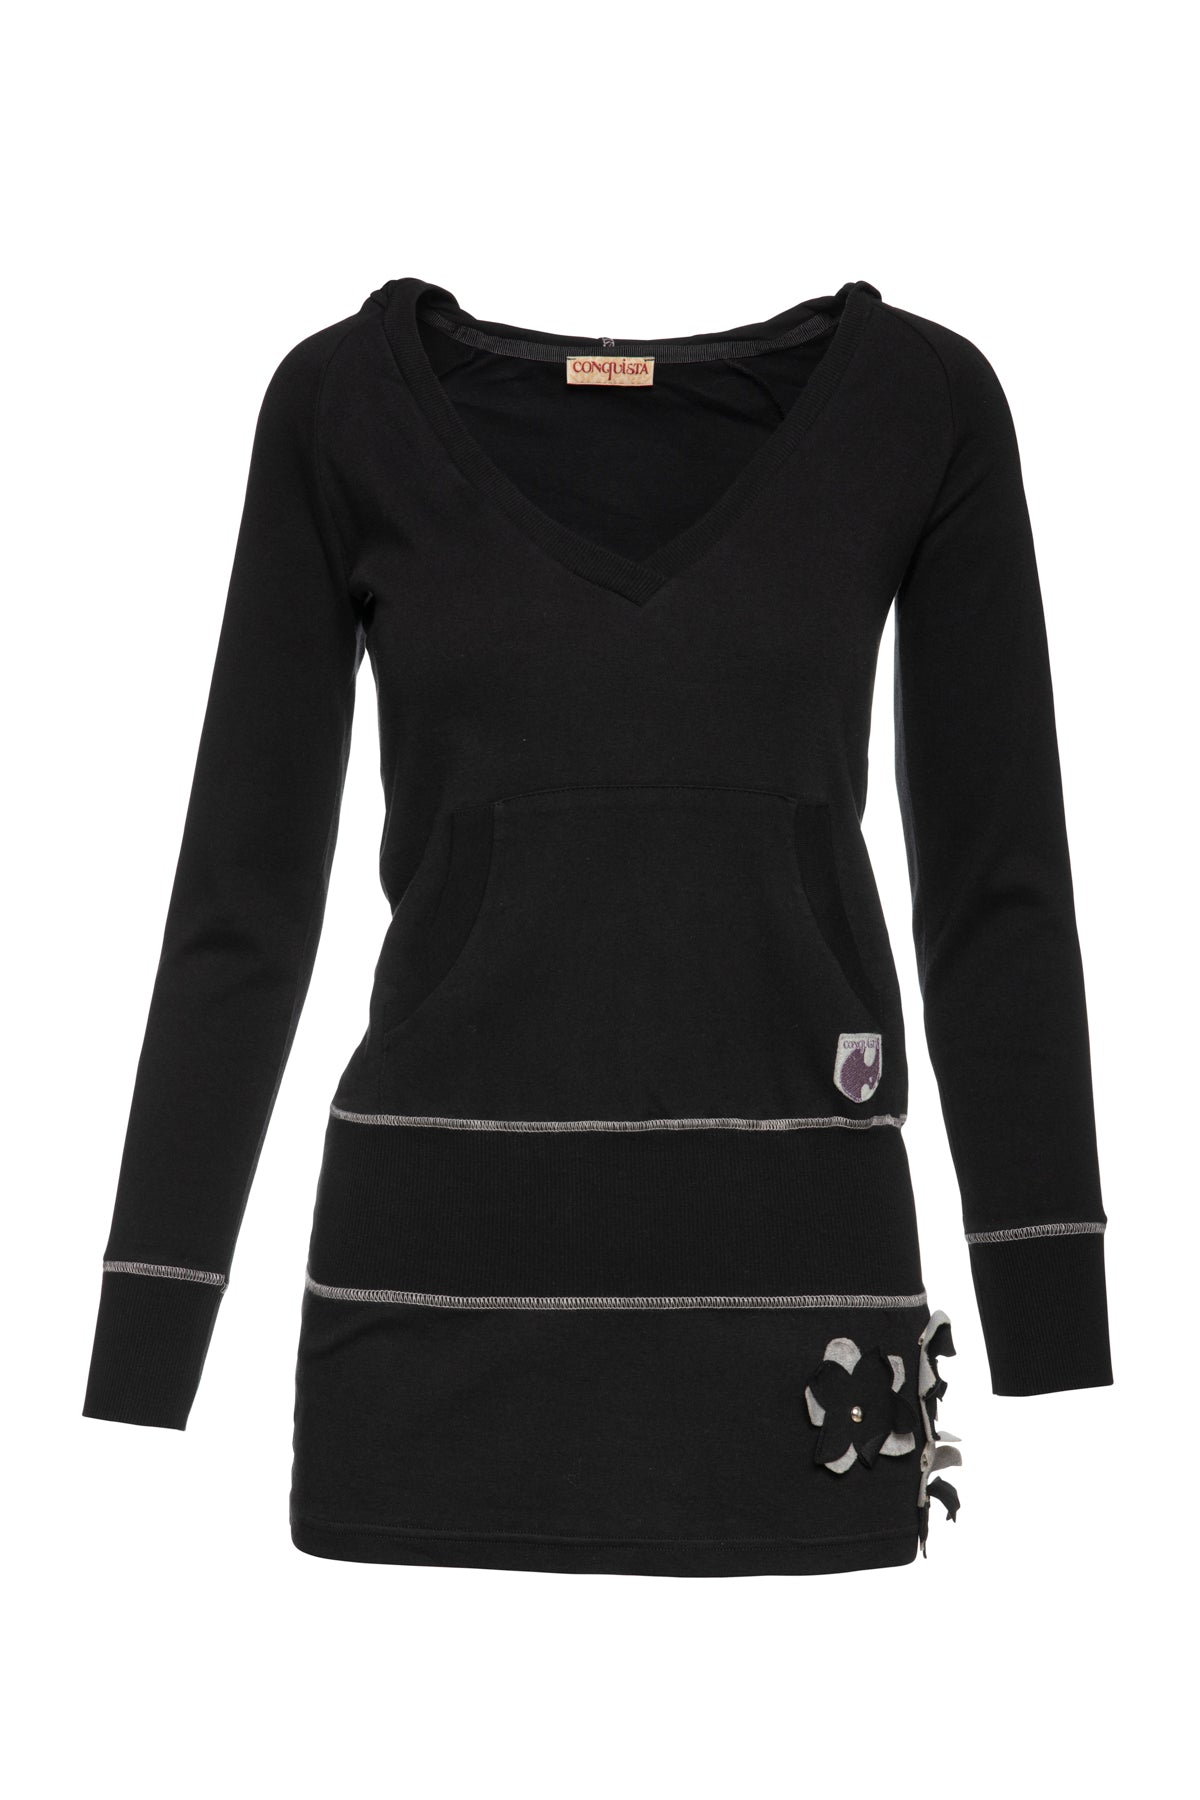 Women’s Hooded Black Tunic With Appliqué Detail Conquista